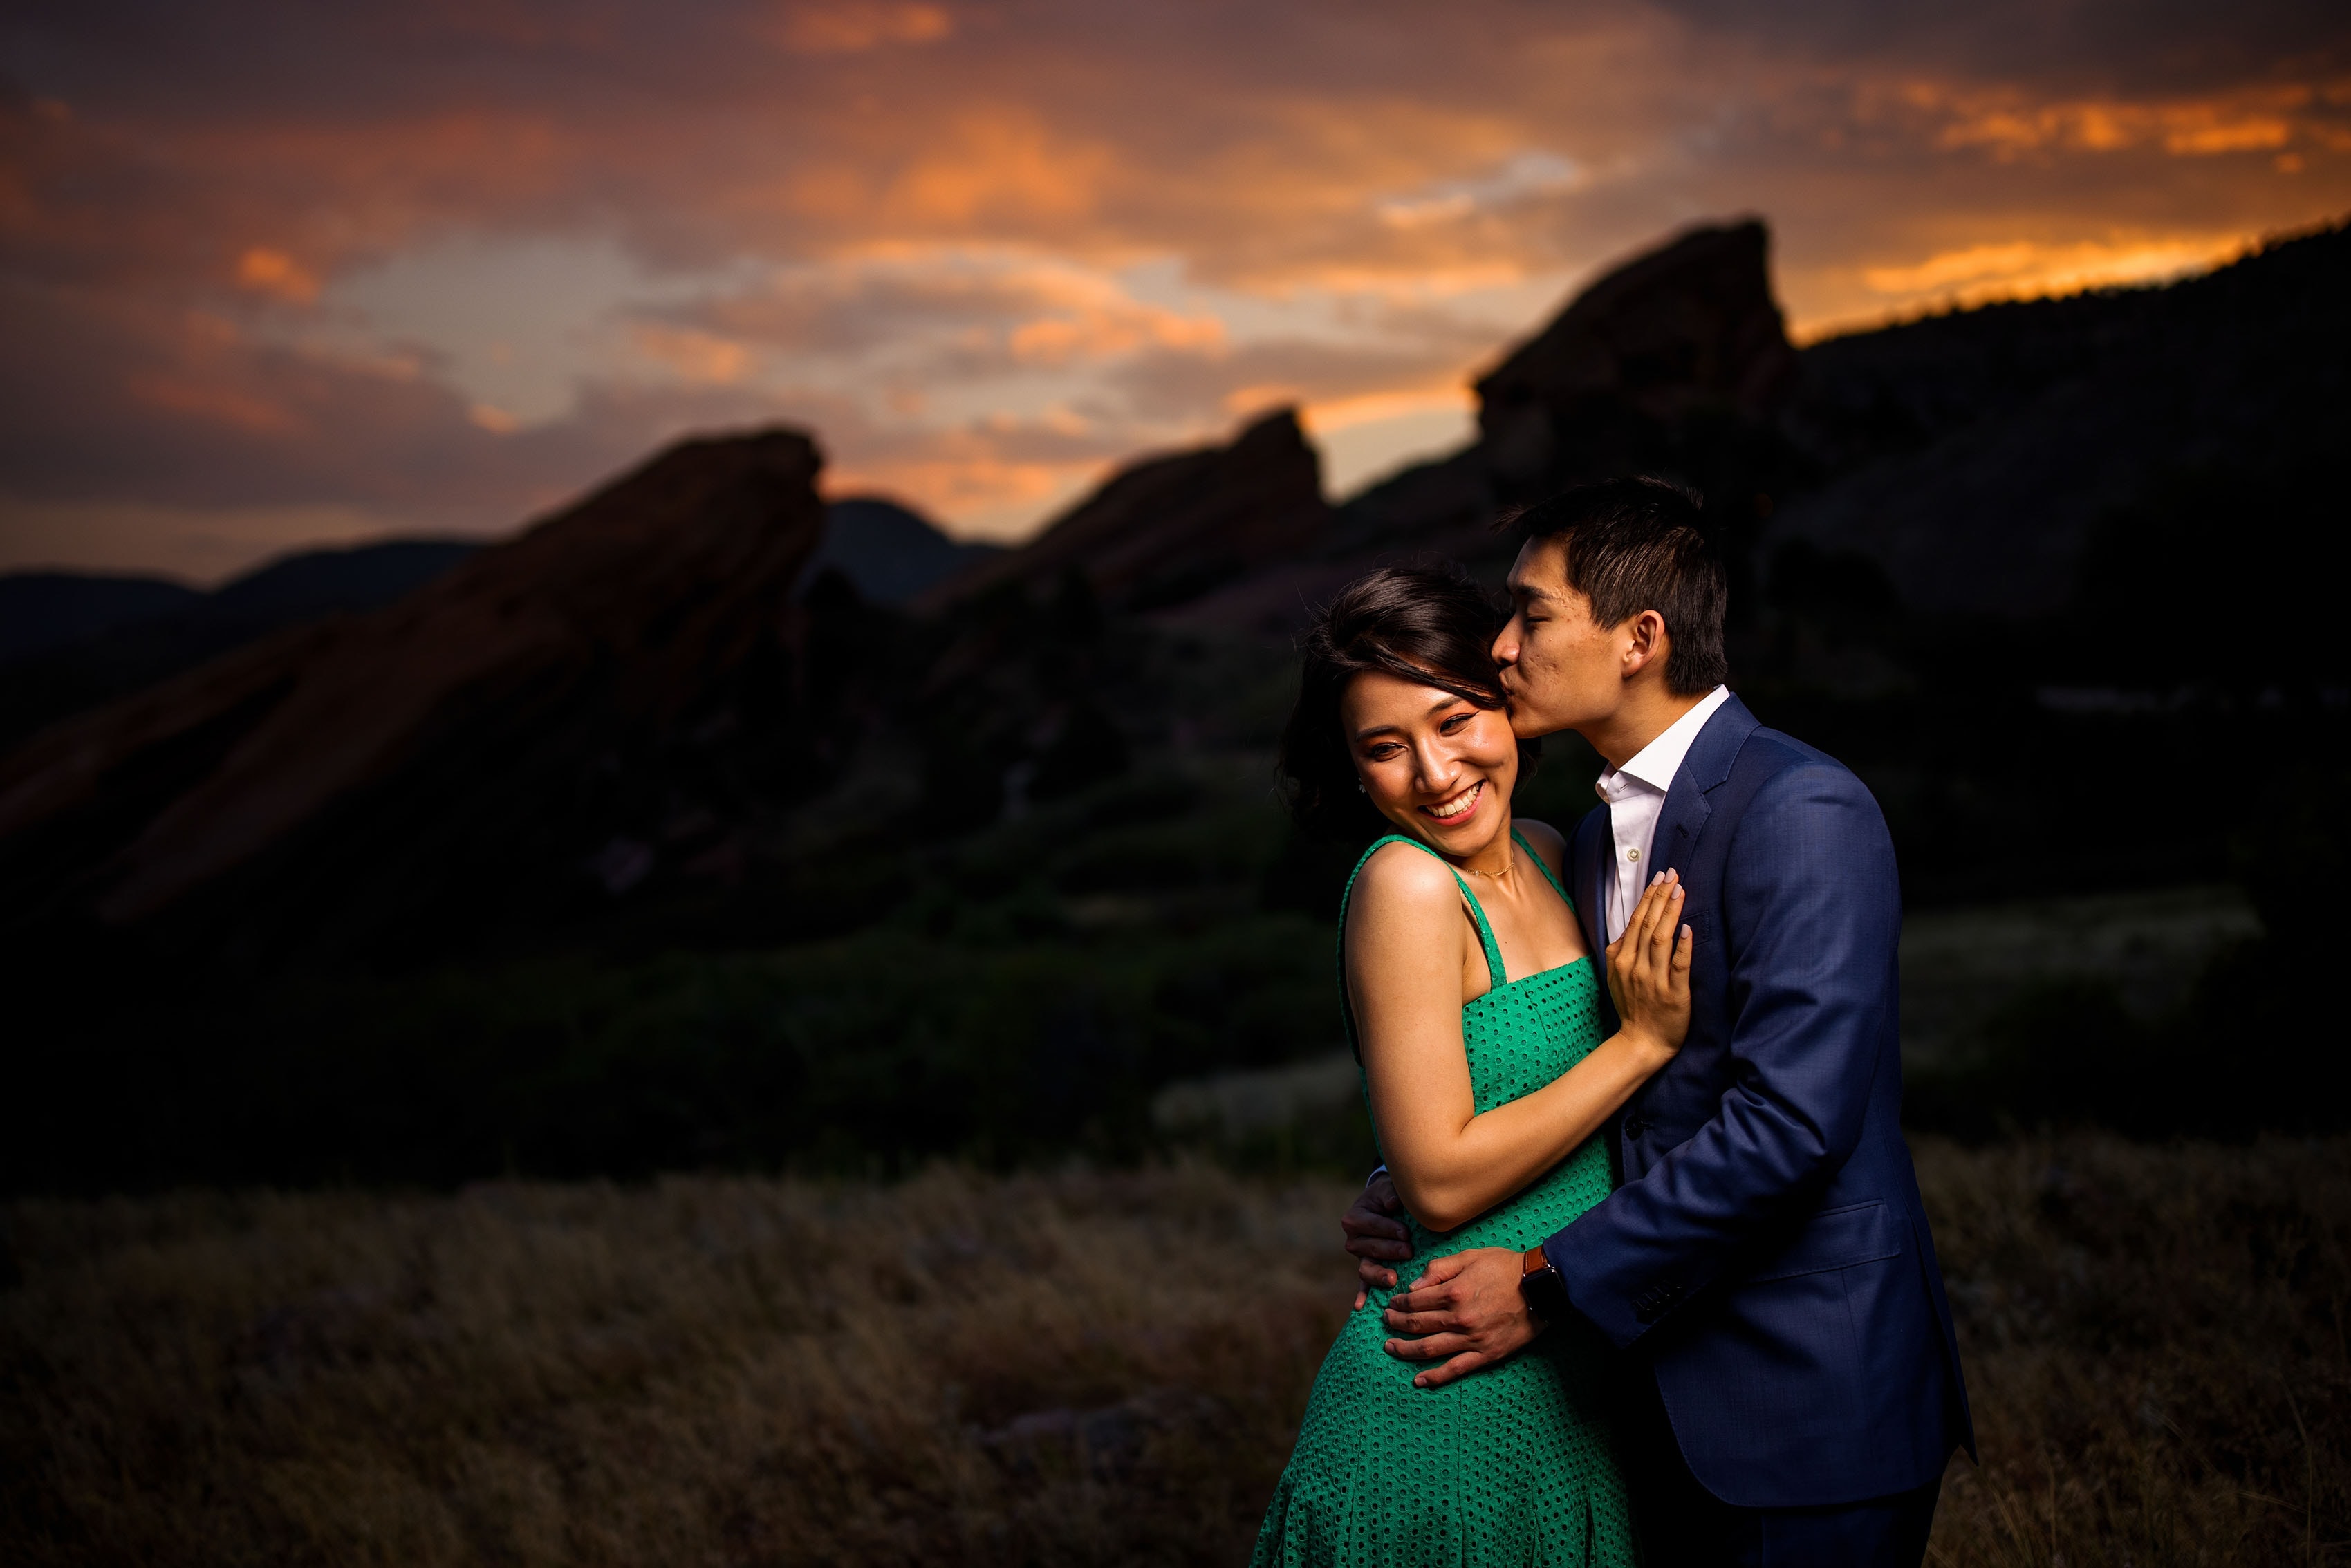 The sun sets over Red Rocks amphitheatre as Sunny kisses Yufan during their engagement session